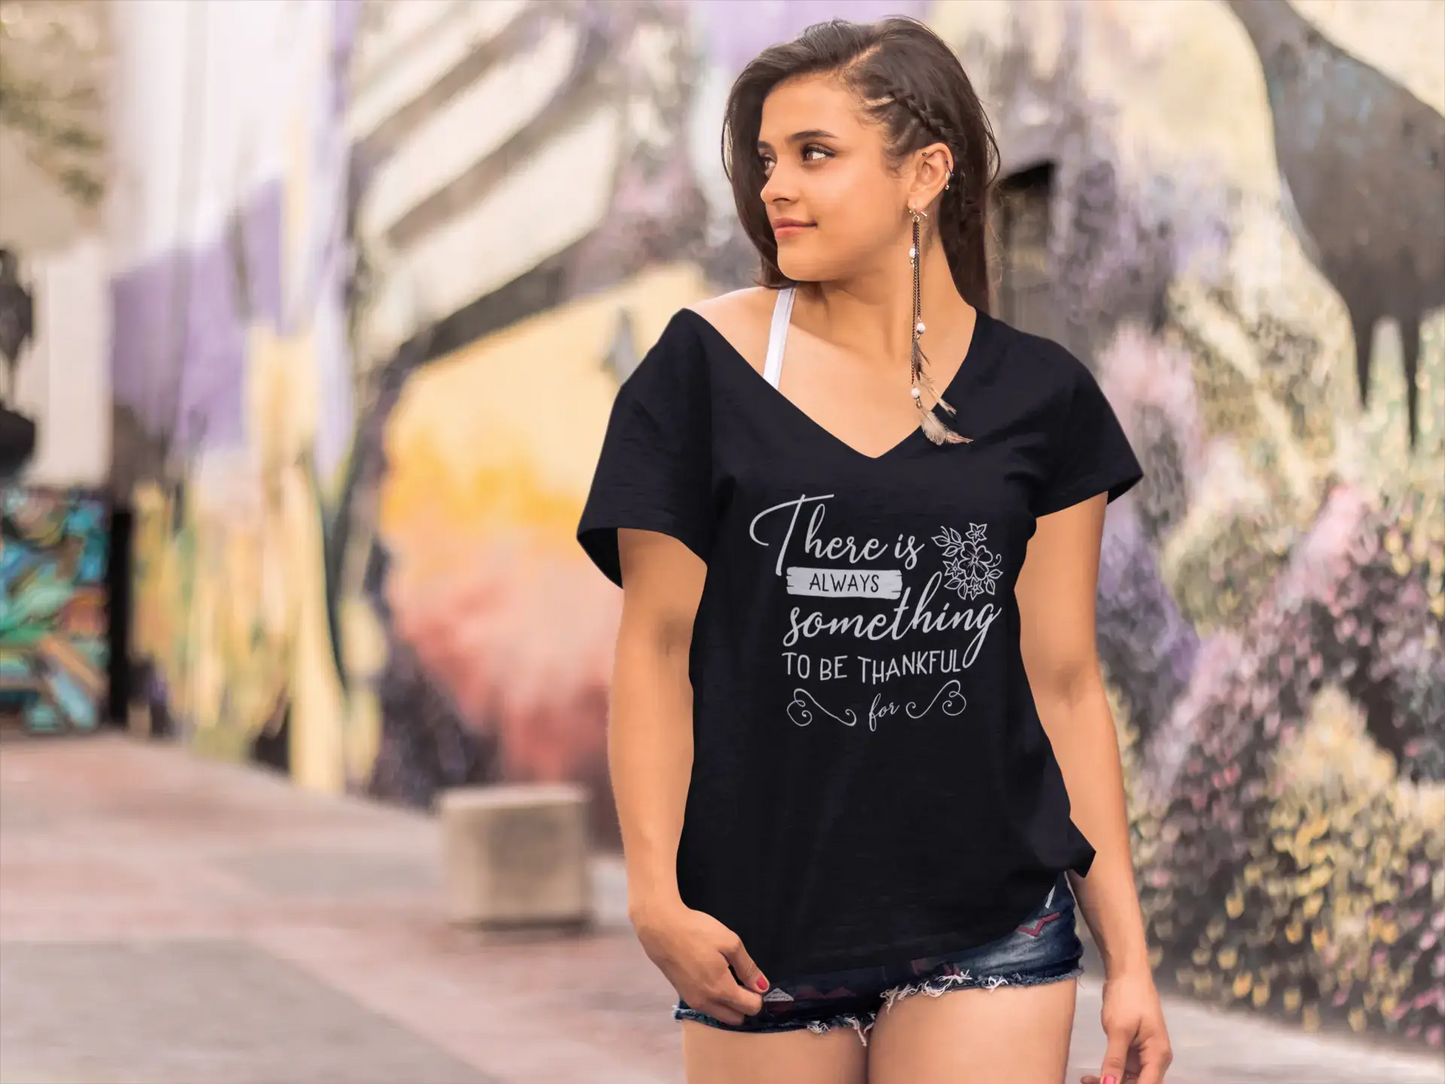 ULTRABASIC Damen-T-Shirt „There Is Always Something to be Thankful for“ – kurzärmelige T-Shirt-Oberteile